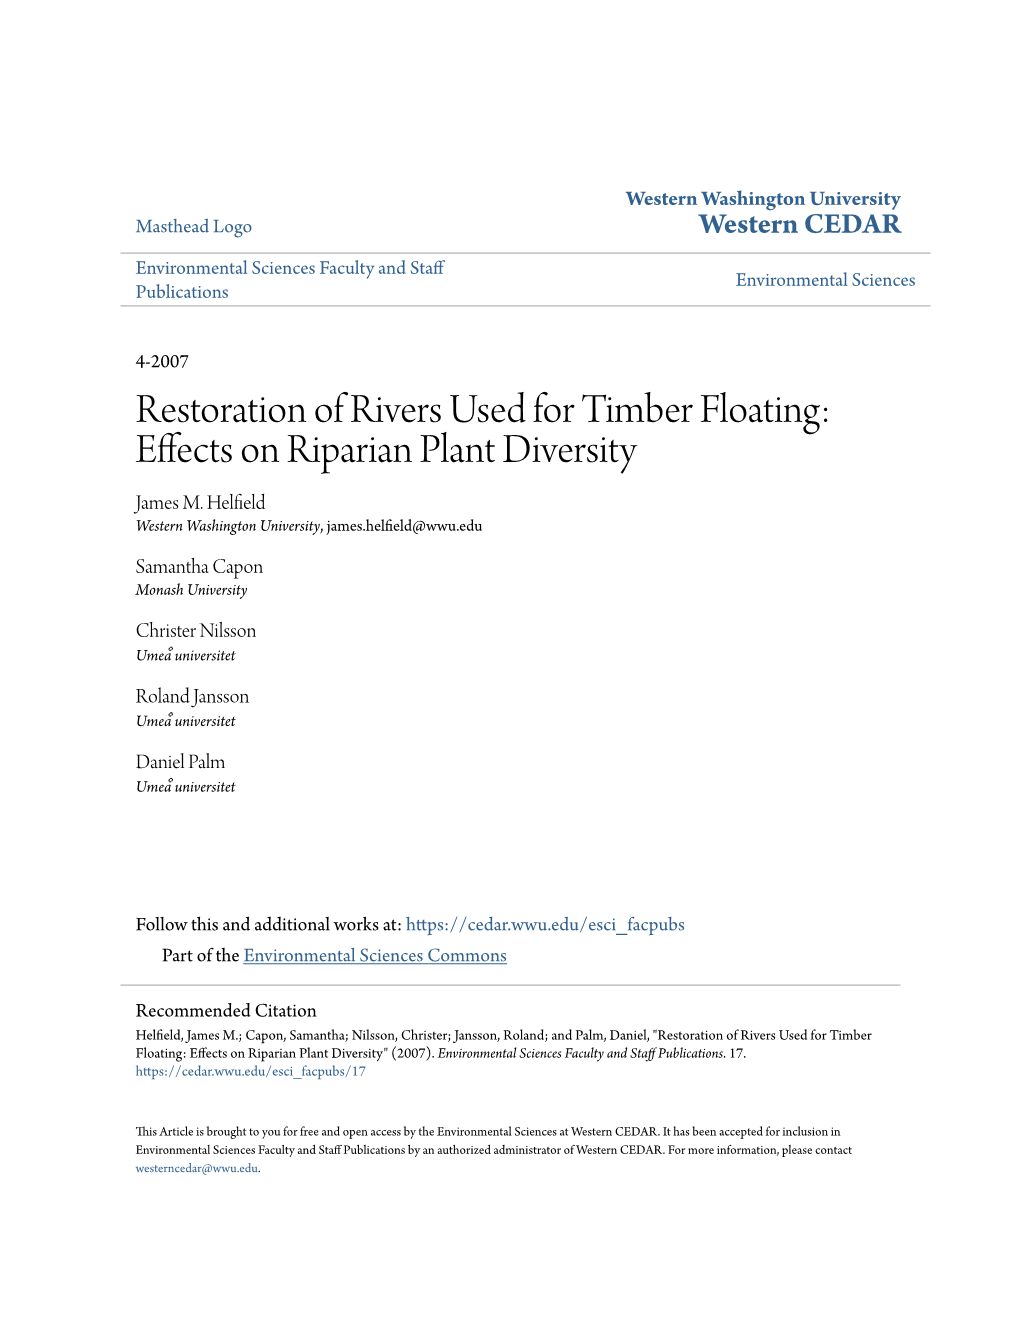 Restoration of Rivers Used for Timber Floating: Effects on Riparian Plant Diversity James M